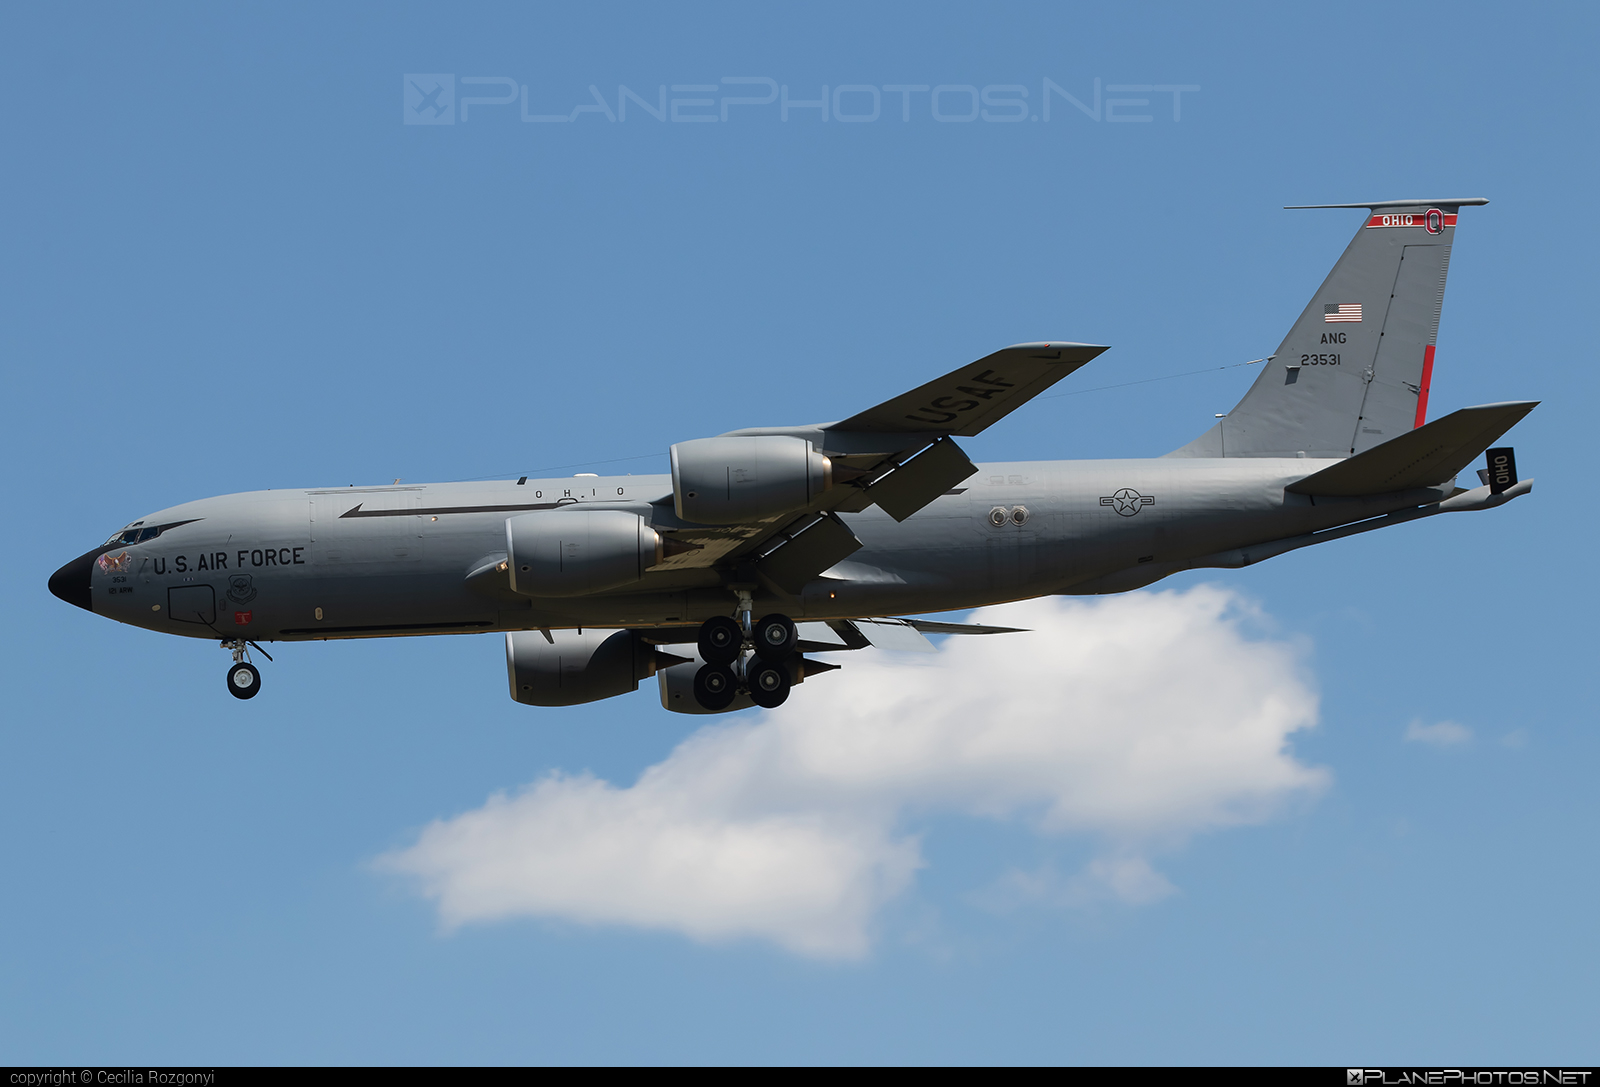 Boeing KC-135R Stratotanker - 62-3531 operated by US Air Force (USAF) #boeing #kc135 #kc135r #kc135stratotanker #stratotanker #usaf #usairforce